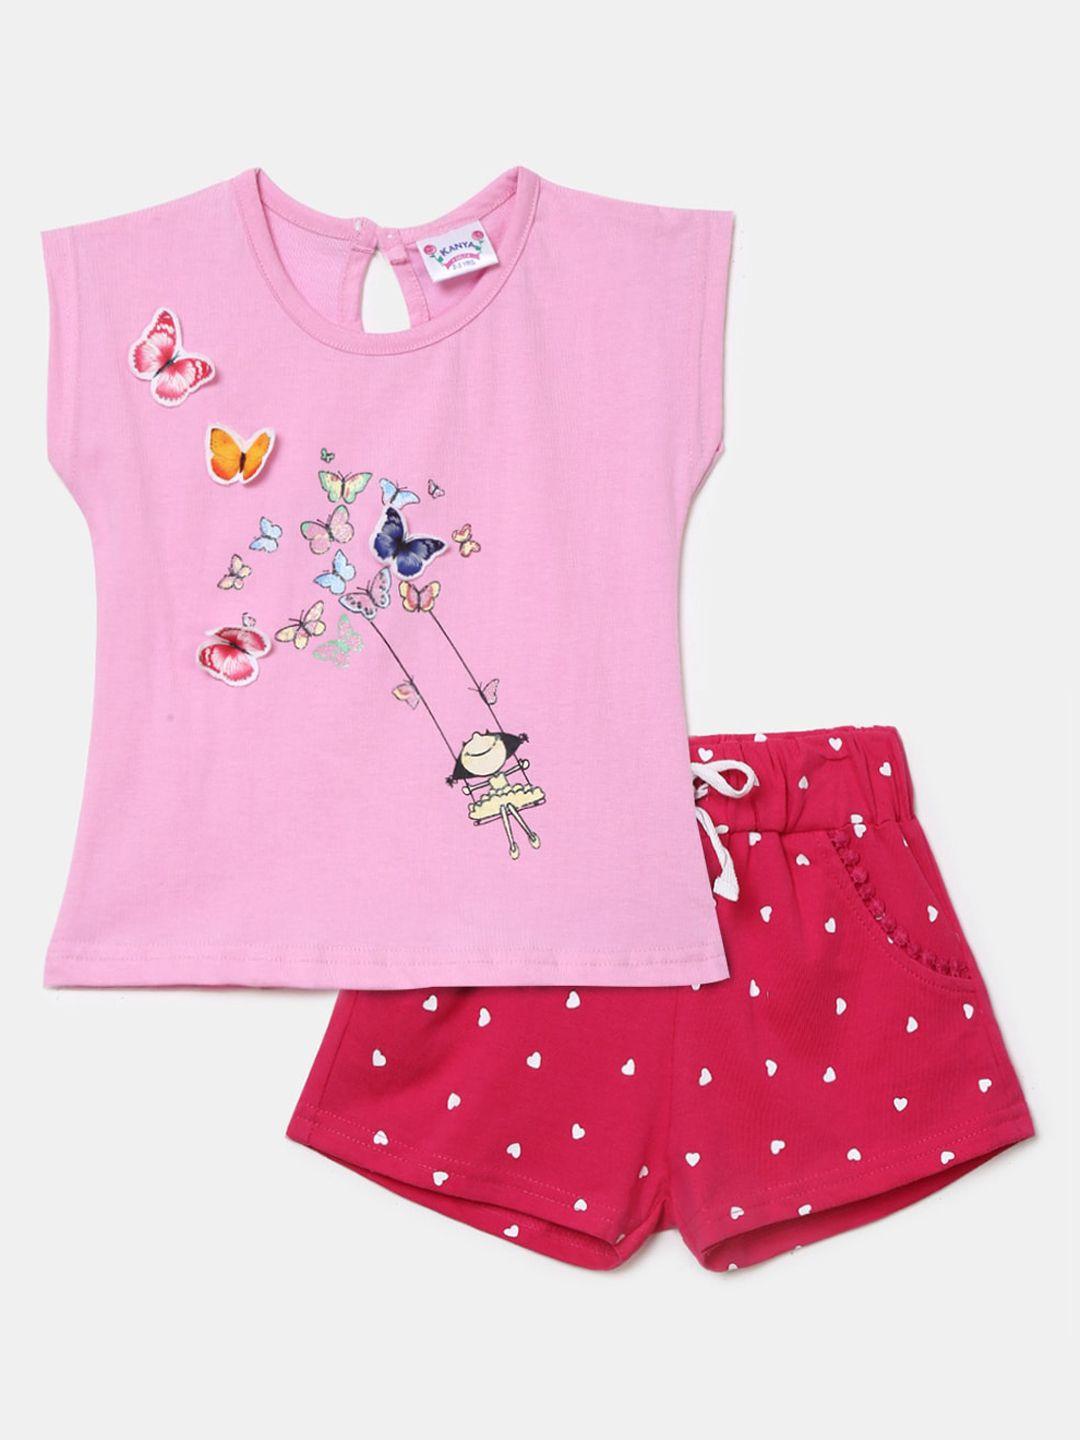 v-mart-girls-printed-pure-cotton-t-shirt-with-shorts